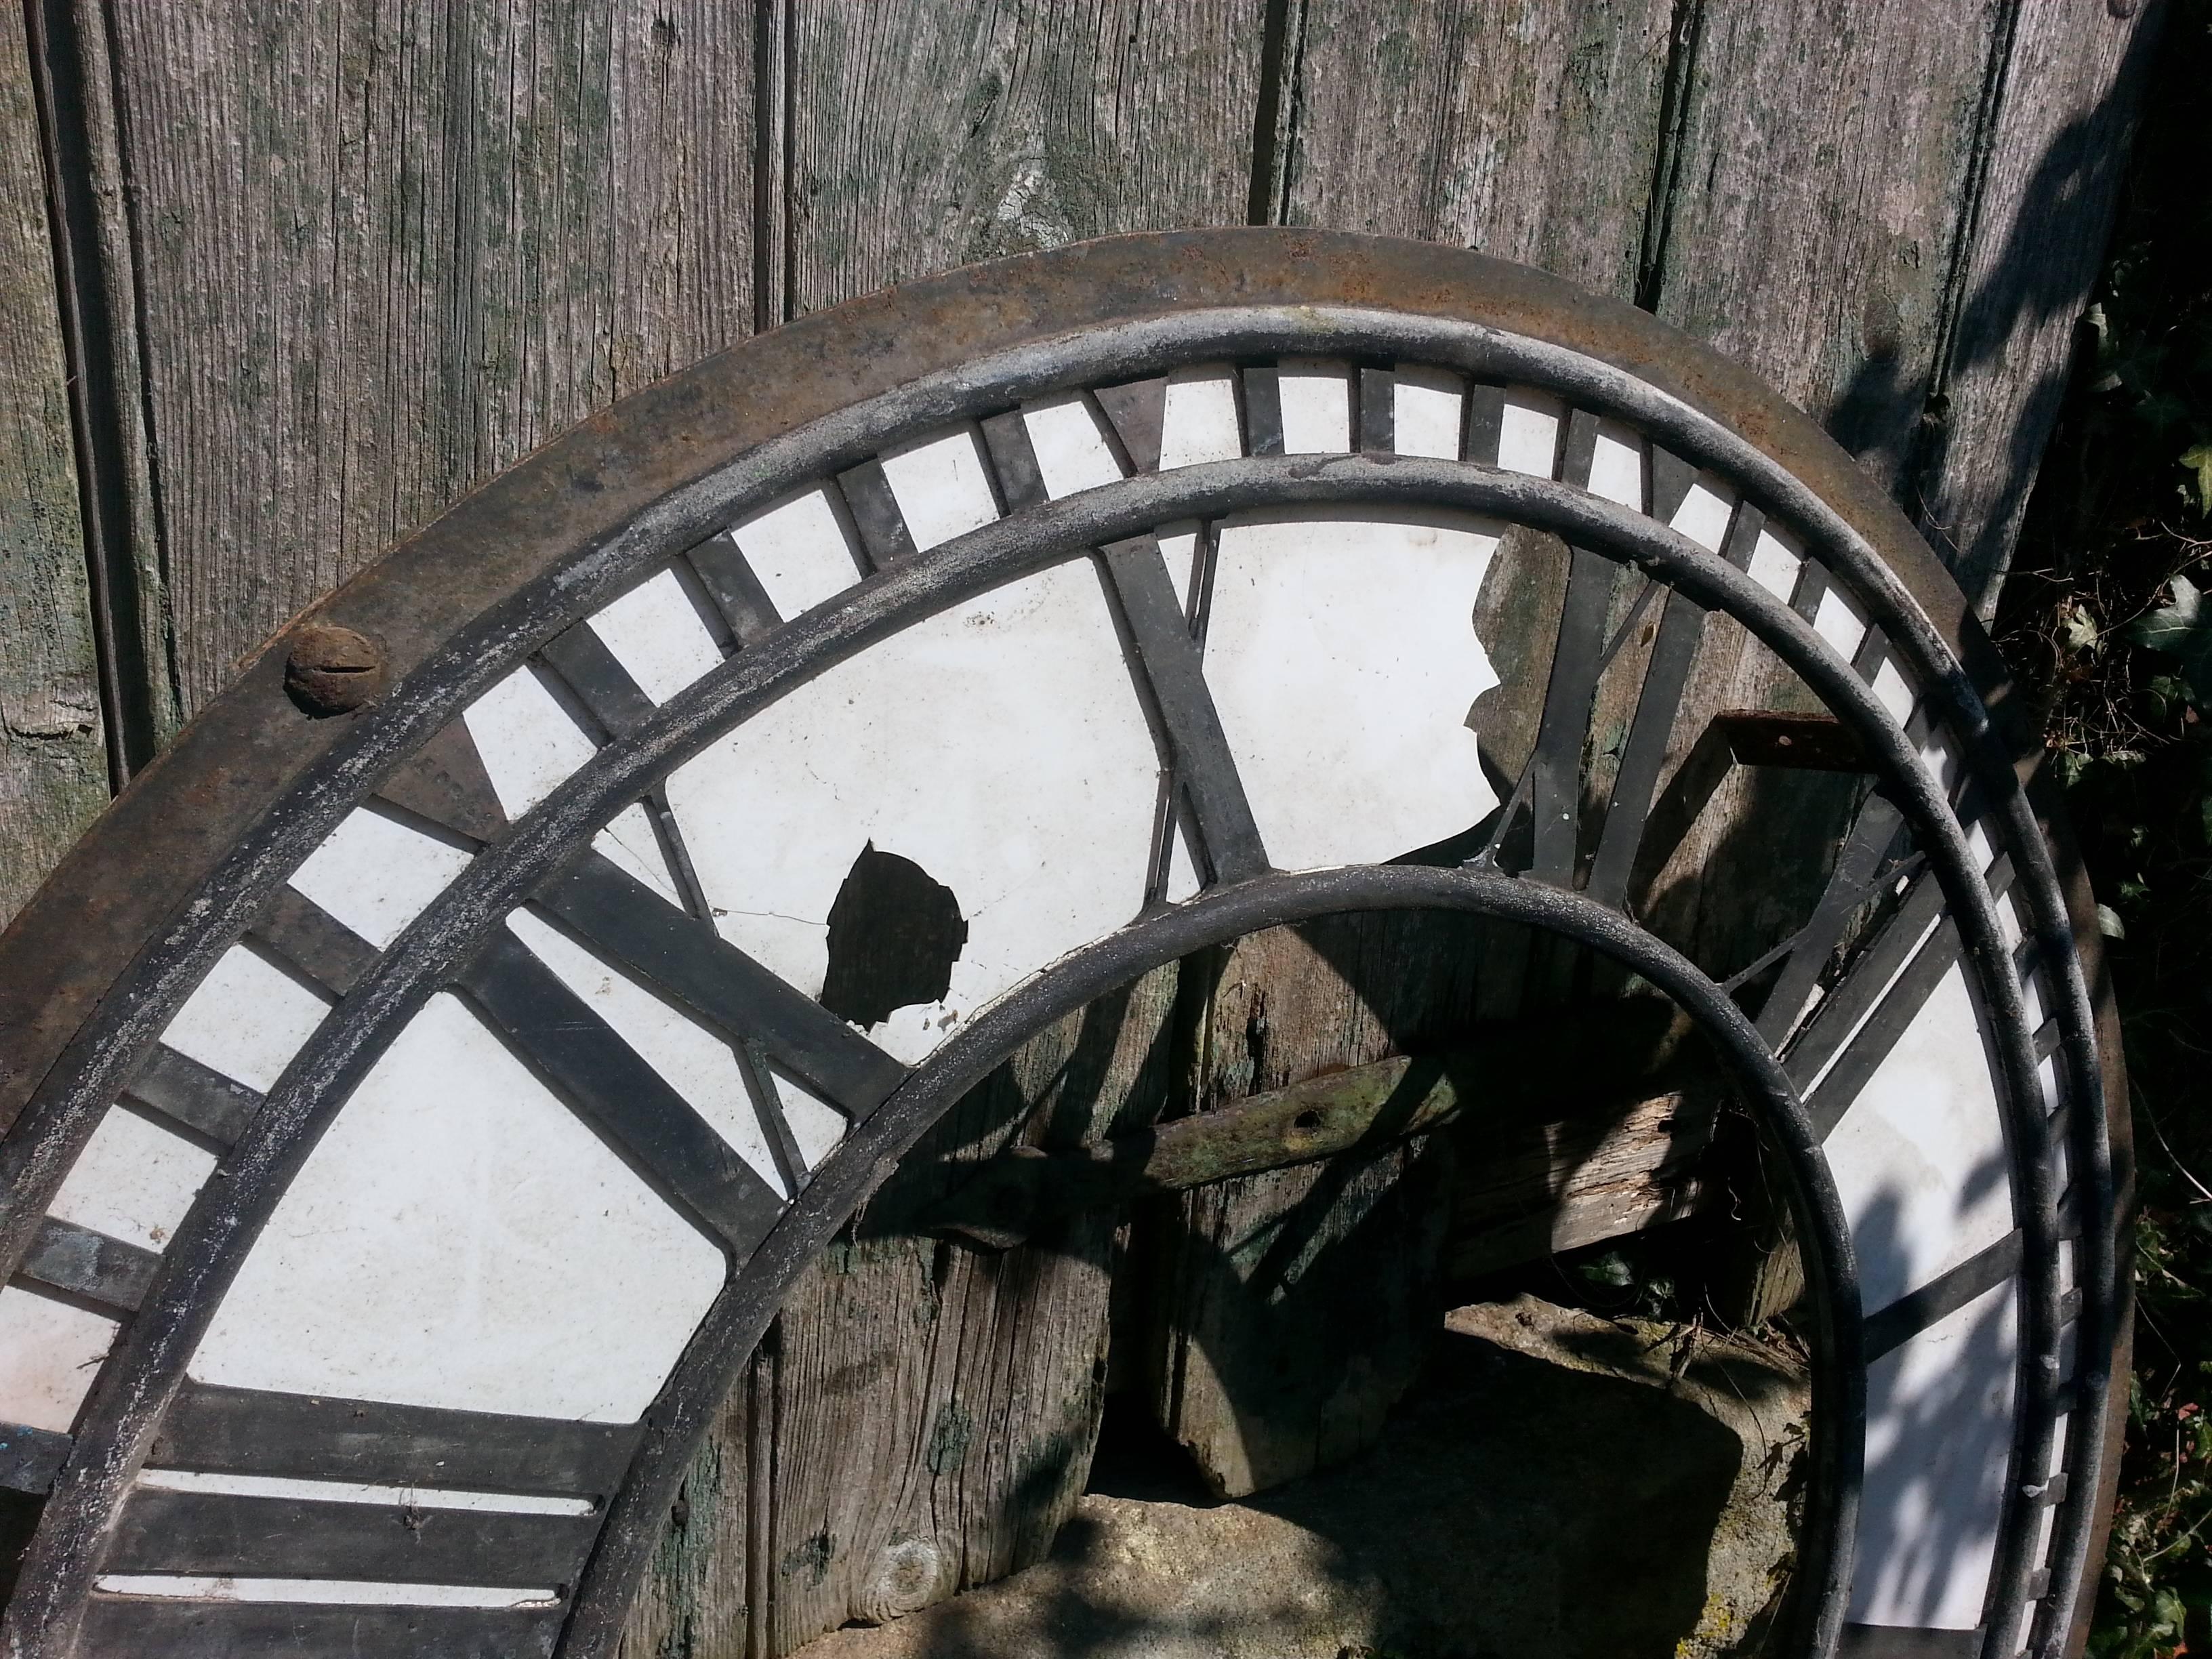 19th Century Large Copper and Iron Turret Clock Dial Face with Original Copper Hands